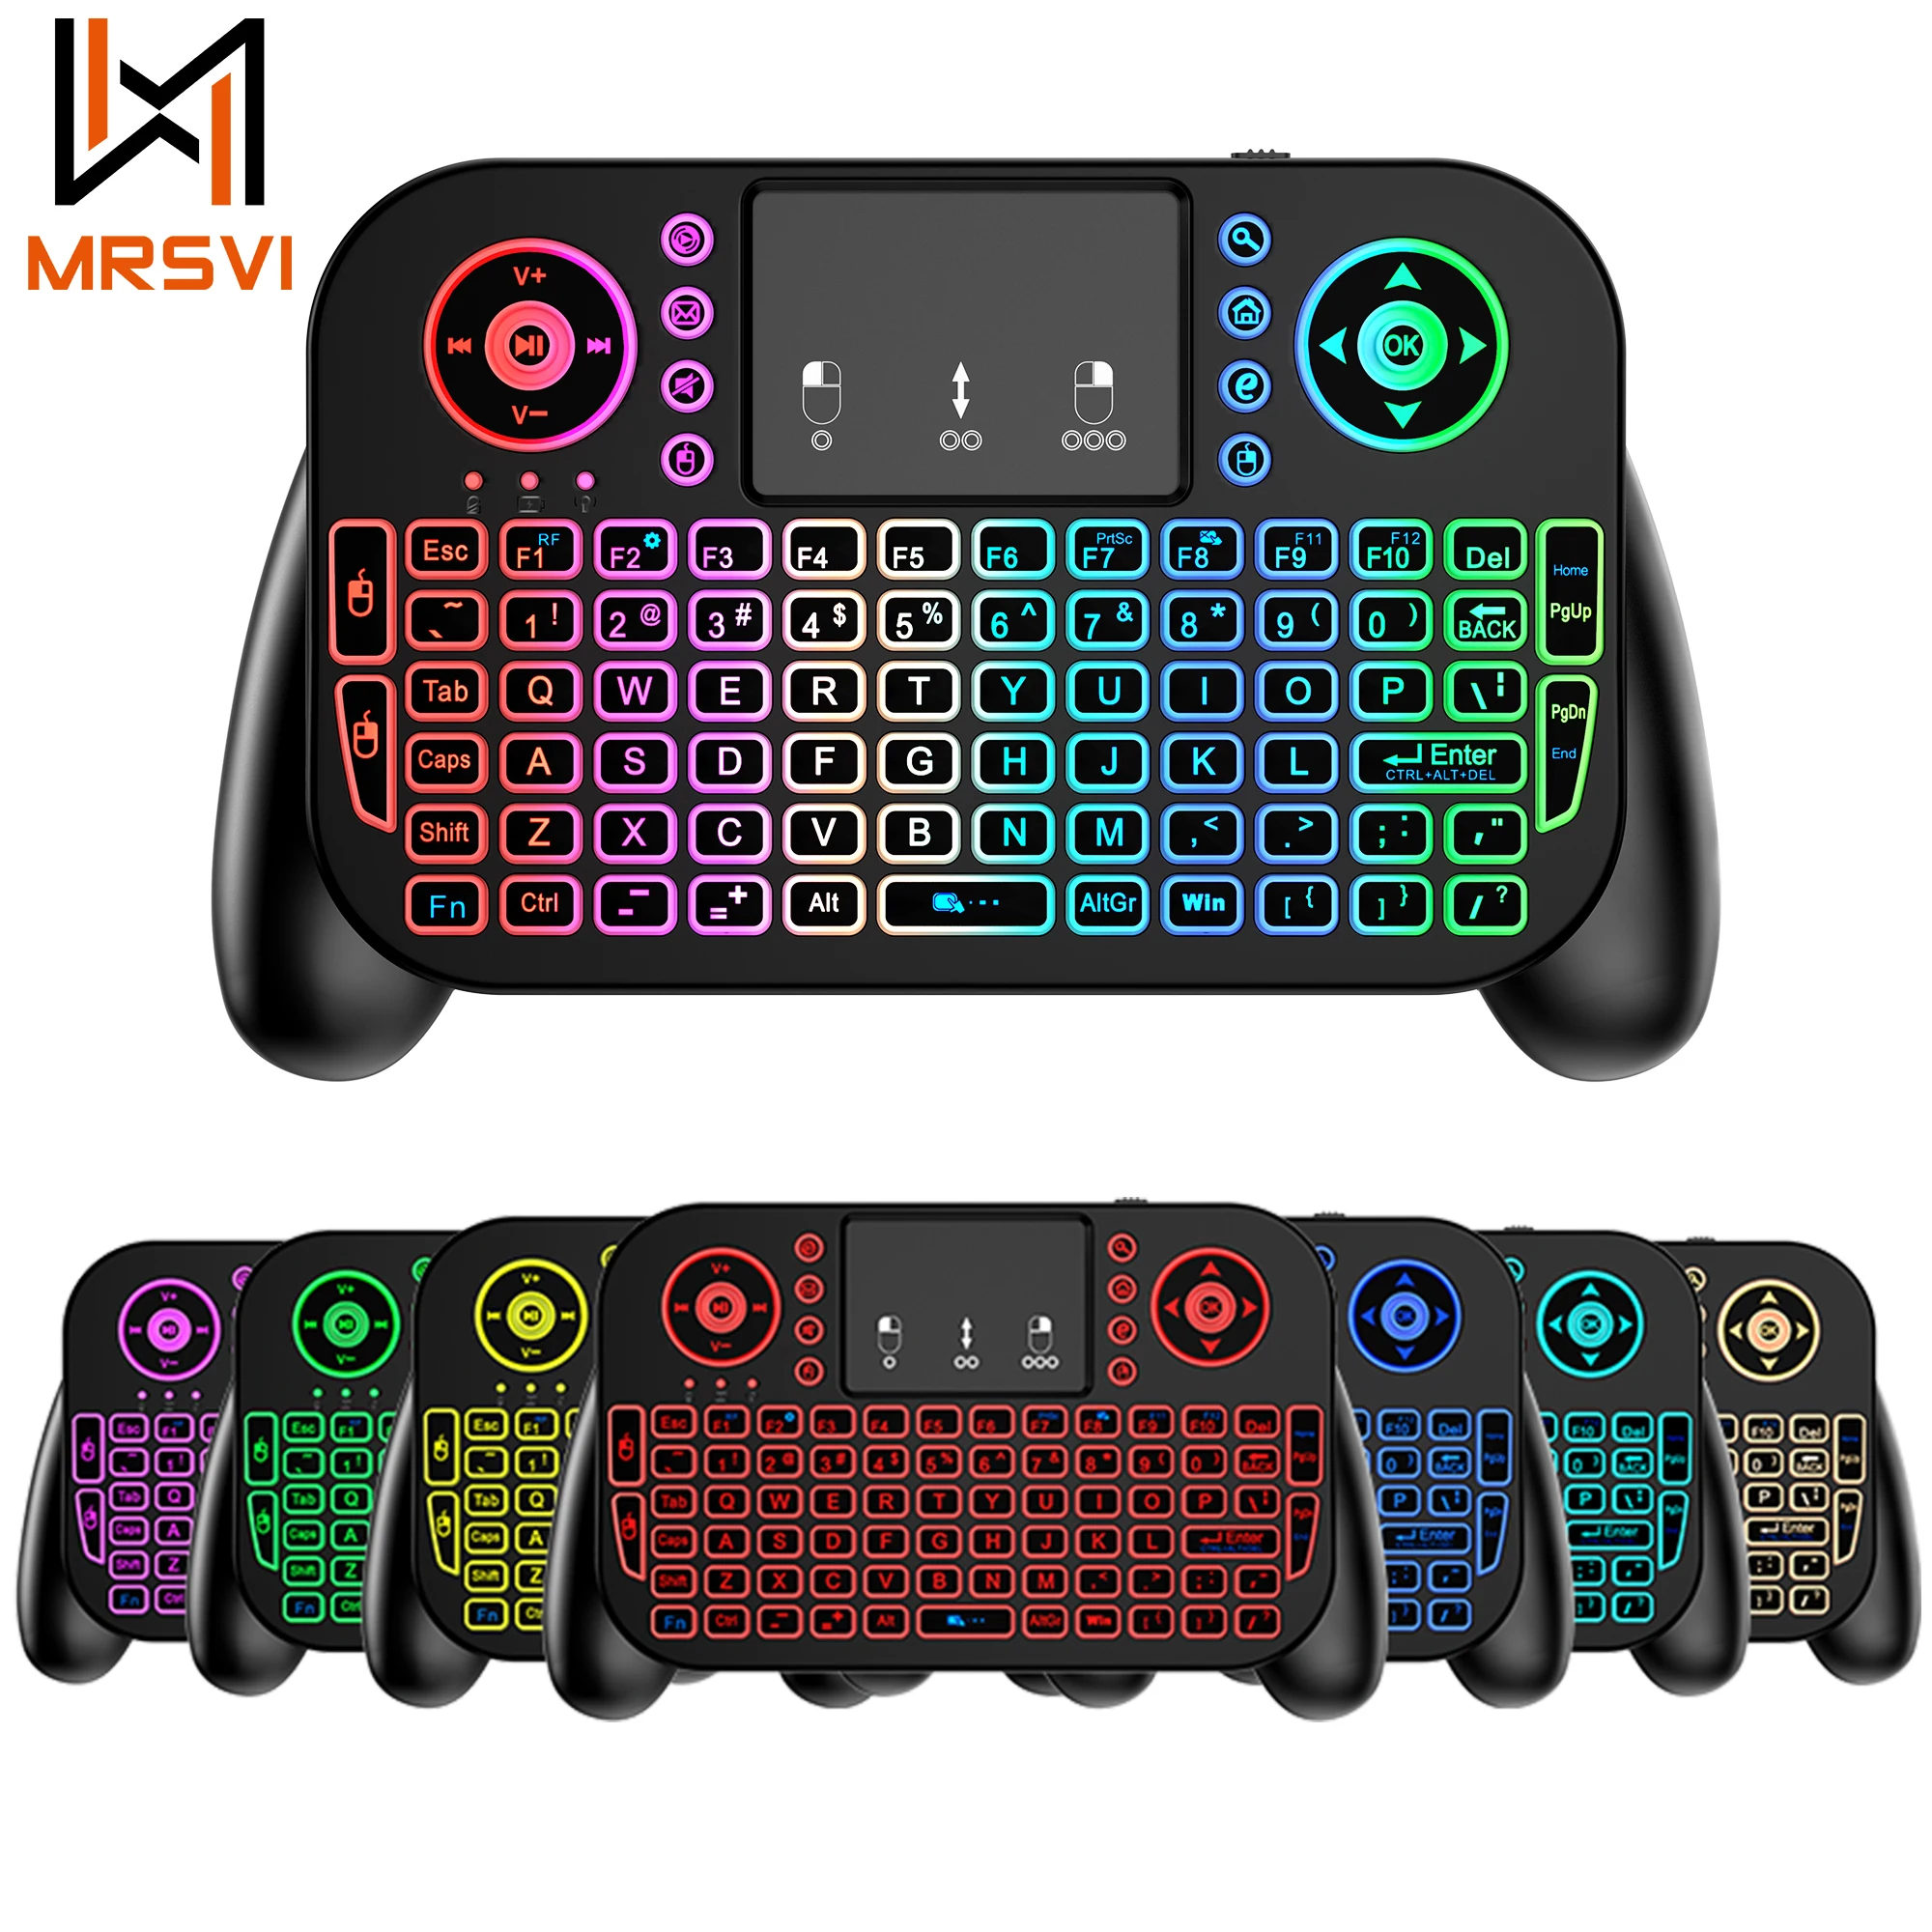 

MRSVI Wireless Backlit Keyboard Russian English Hebrew Version V8 2.4GHz Air Mouse Touchpad Handheld for Android TV BOX Mini PC